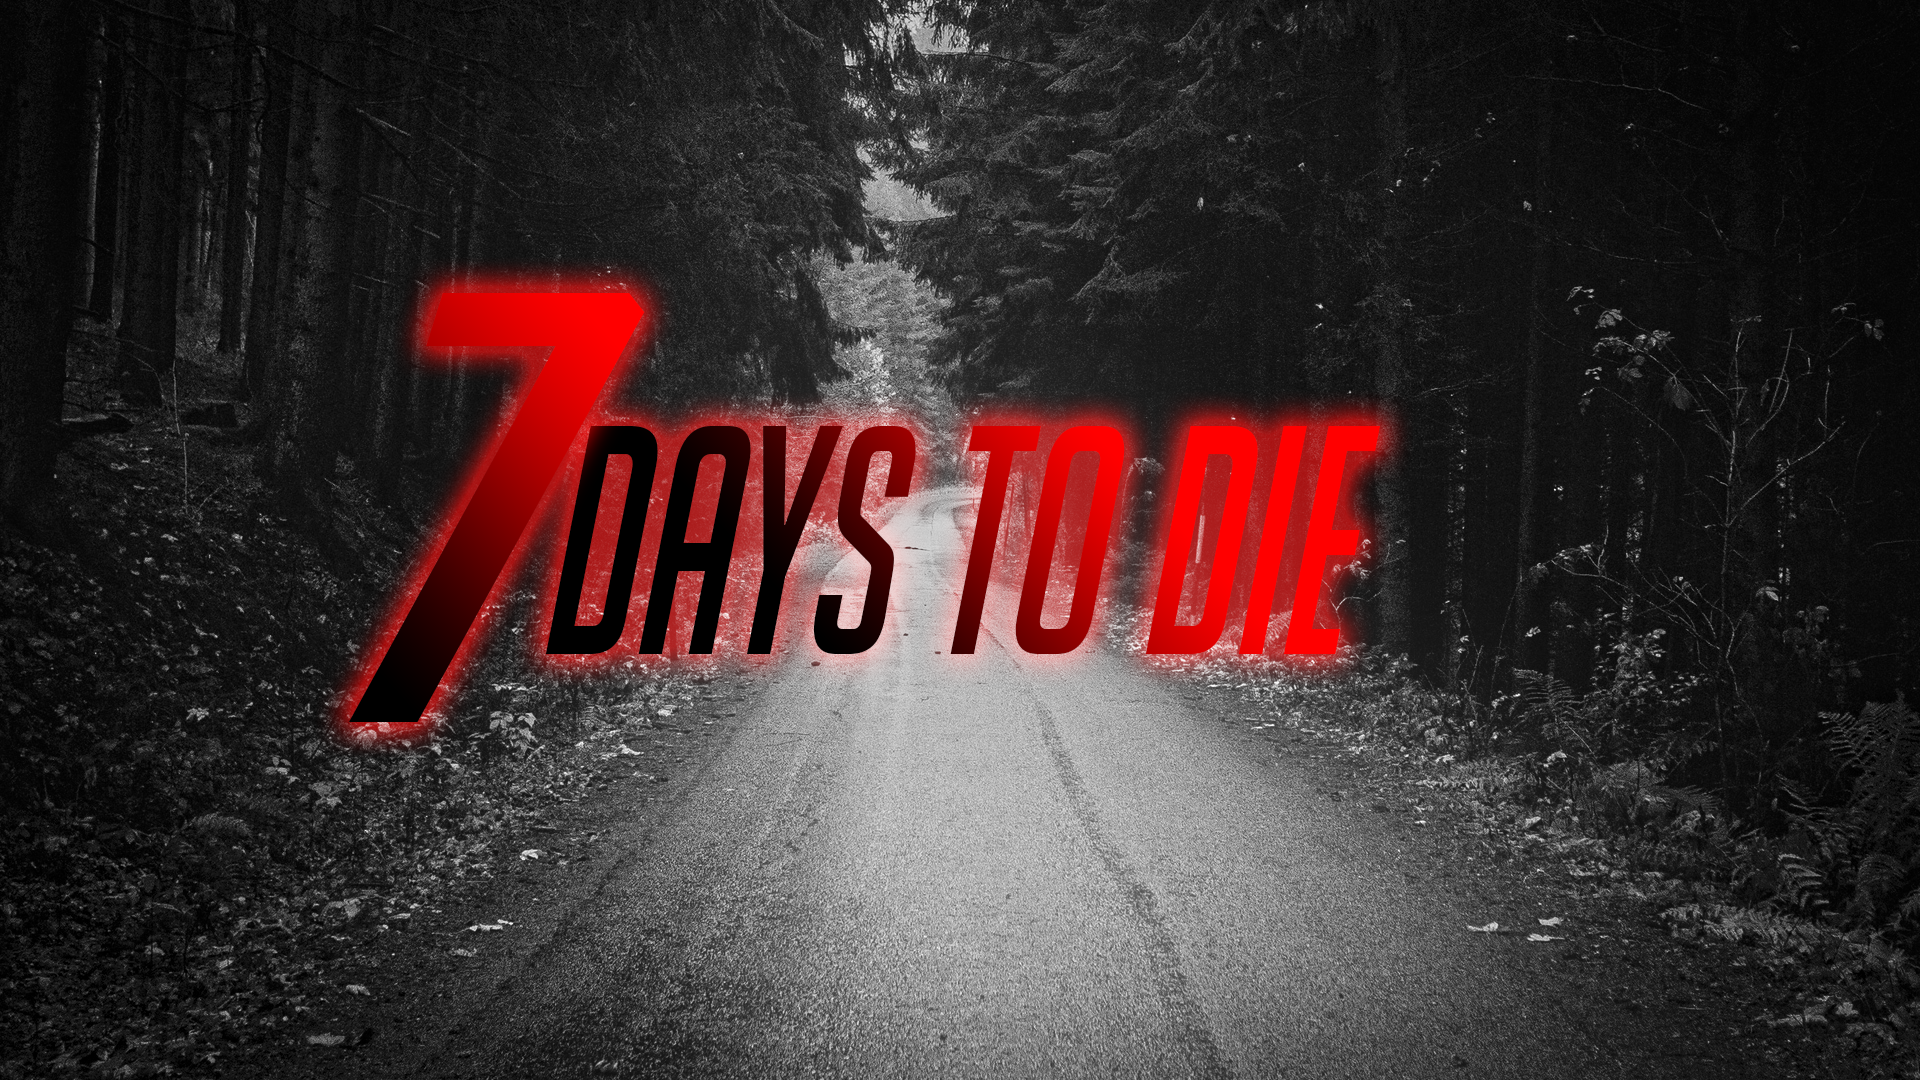 Video Games Logotype 7 Days To Die Red 1920x1080